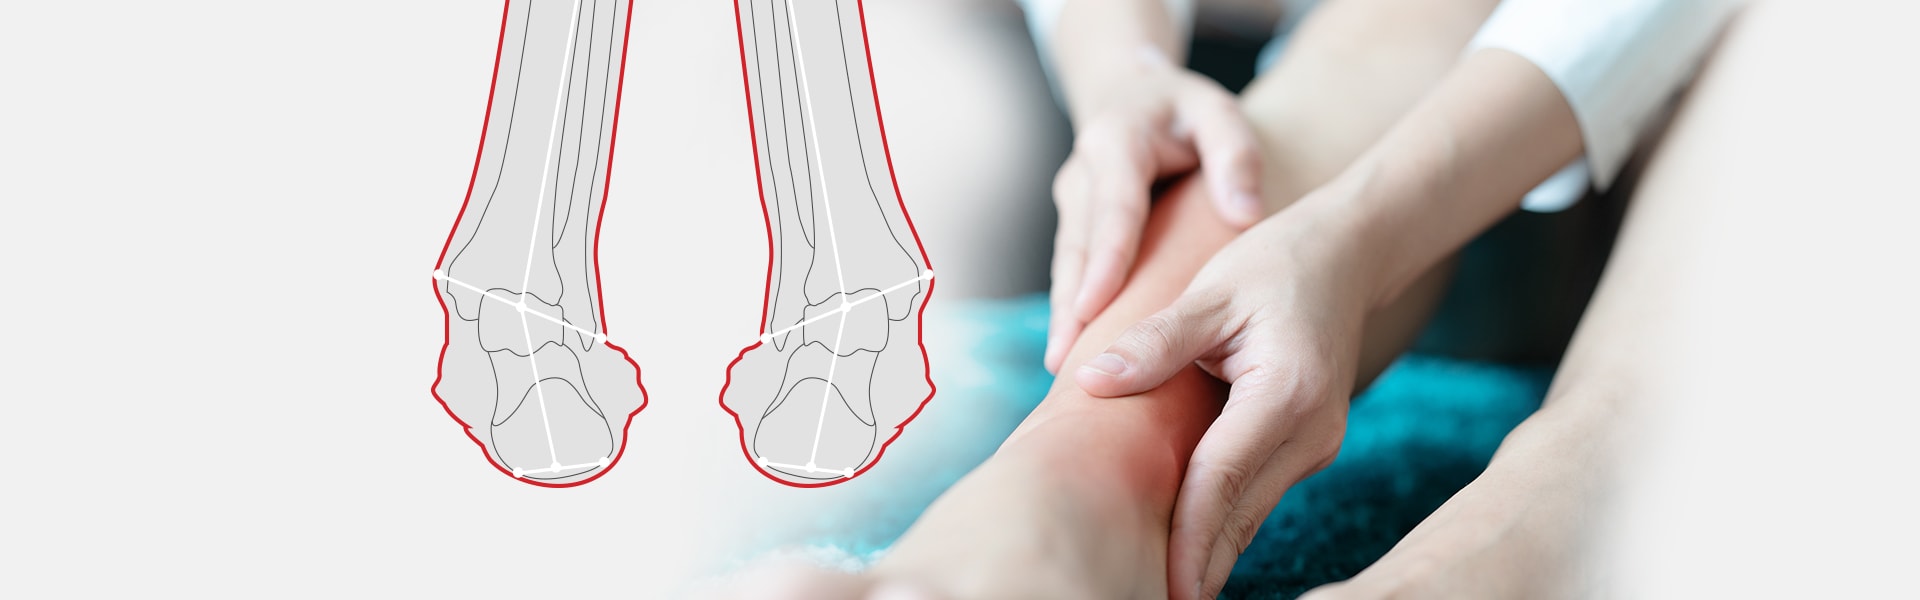 Supination of Foot and Oversupination